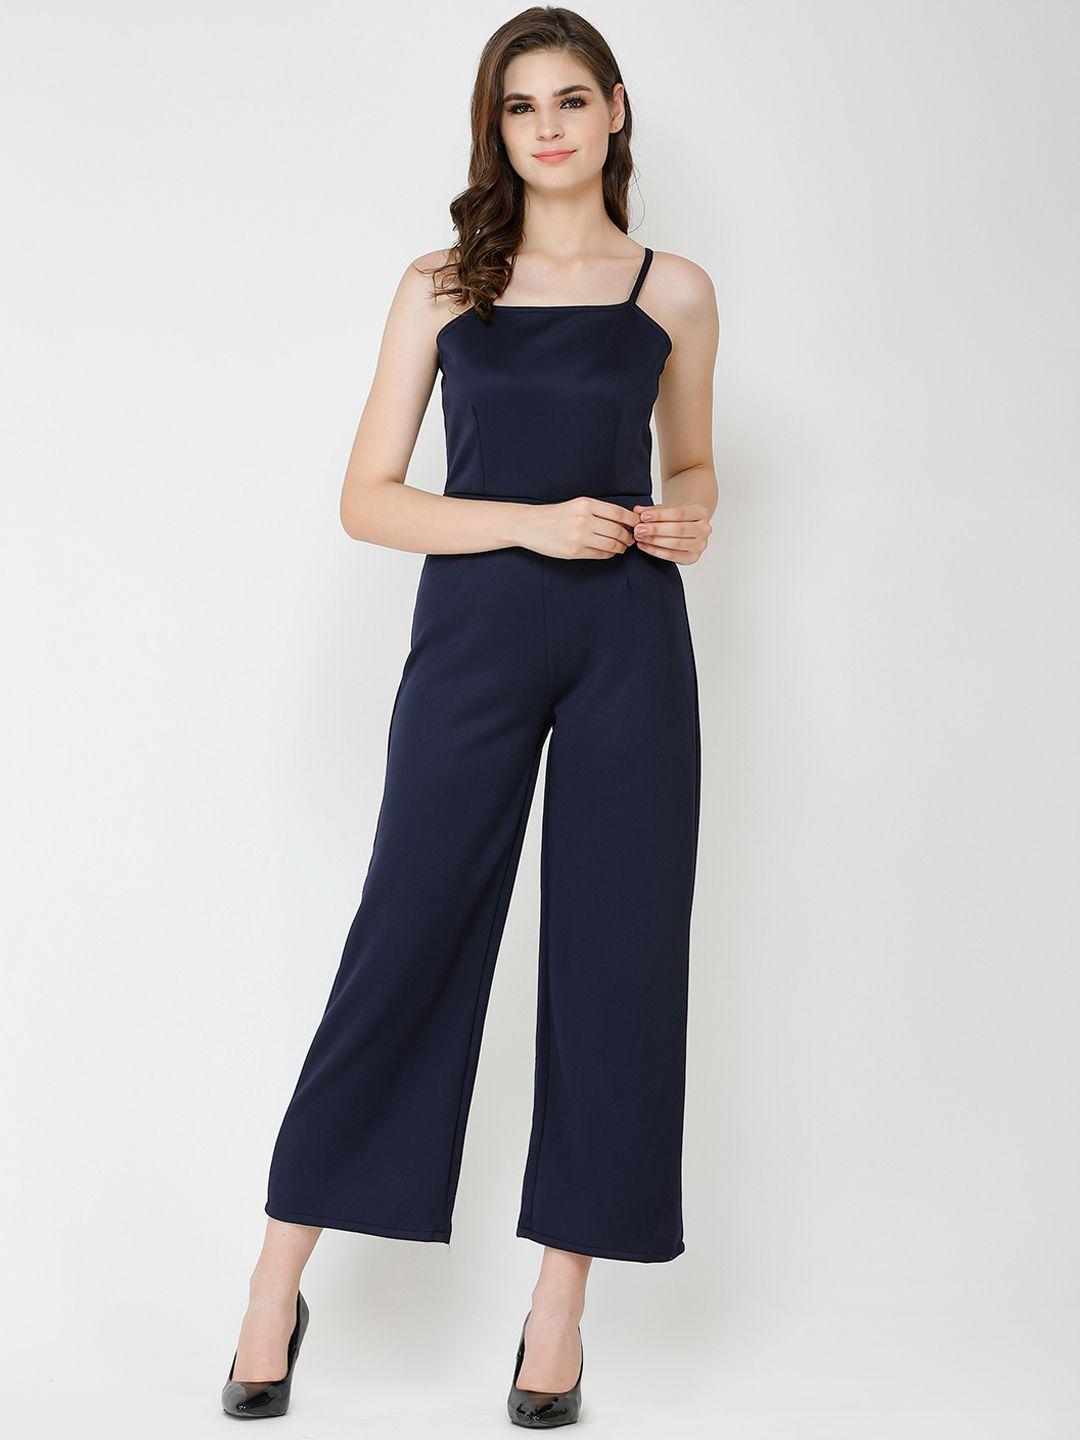 cation women navy blue solid basic jumpsuit